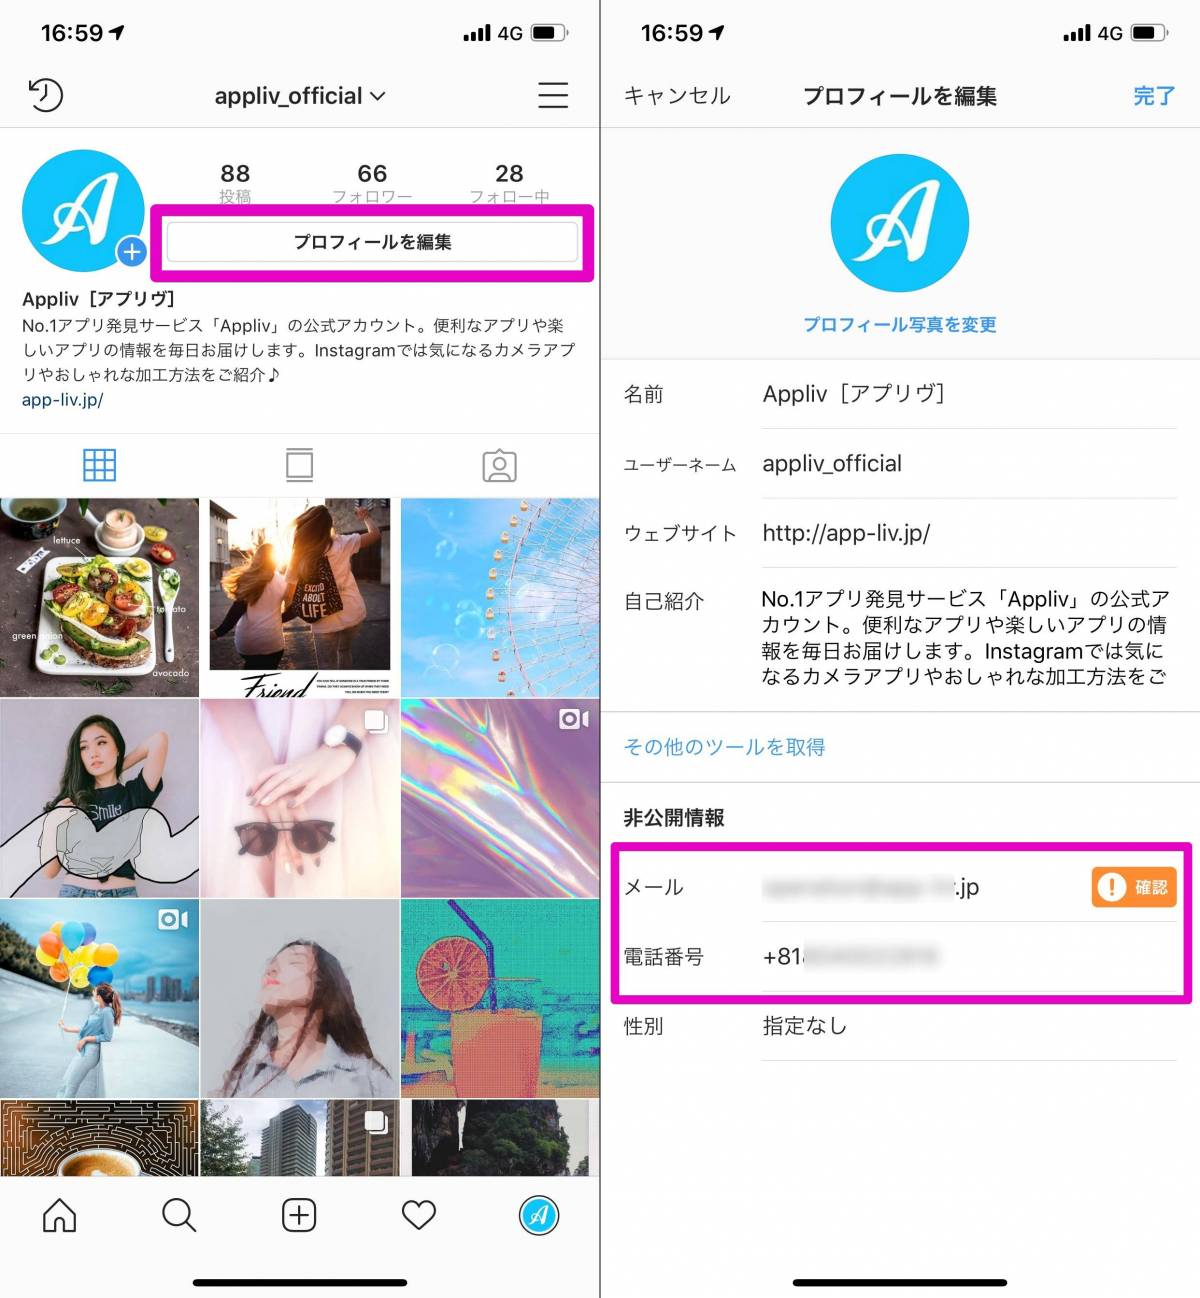 Instagram 登録メールアドレス 電話番号の確認 変更方法 Iphone Android Appliv Topics